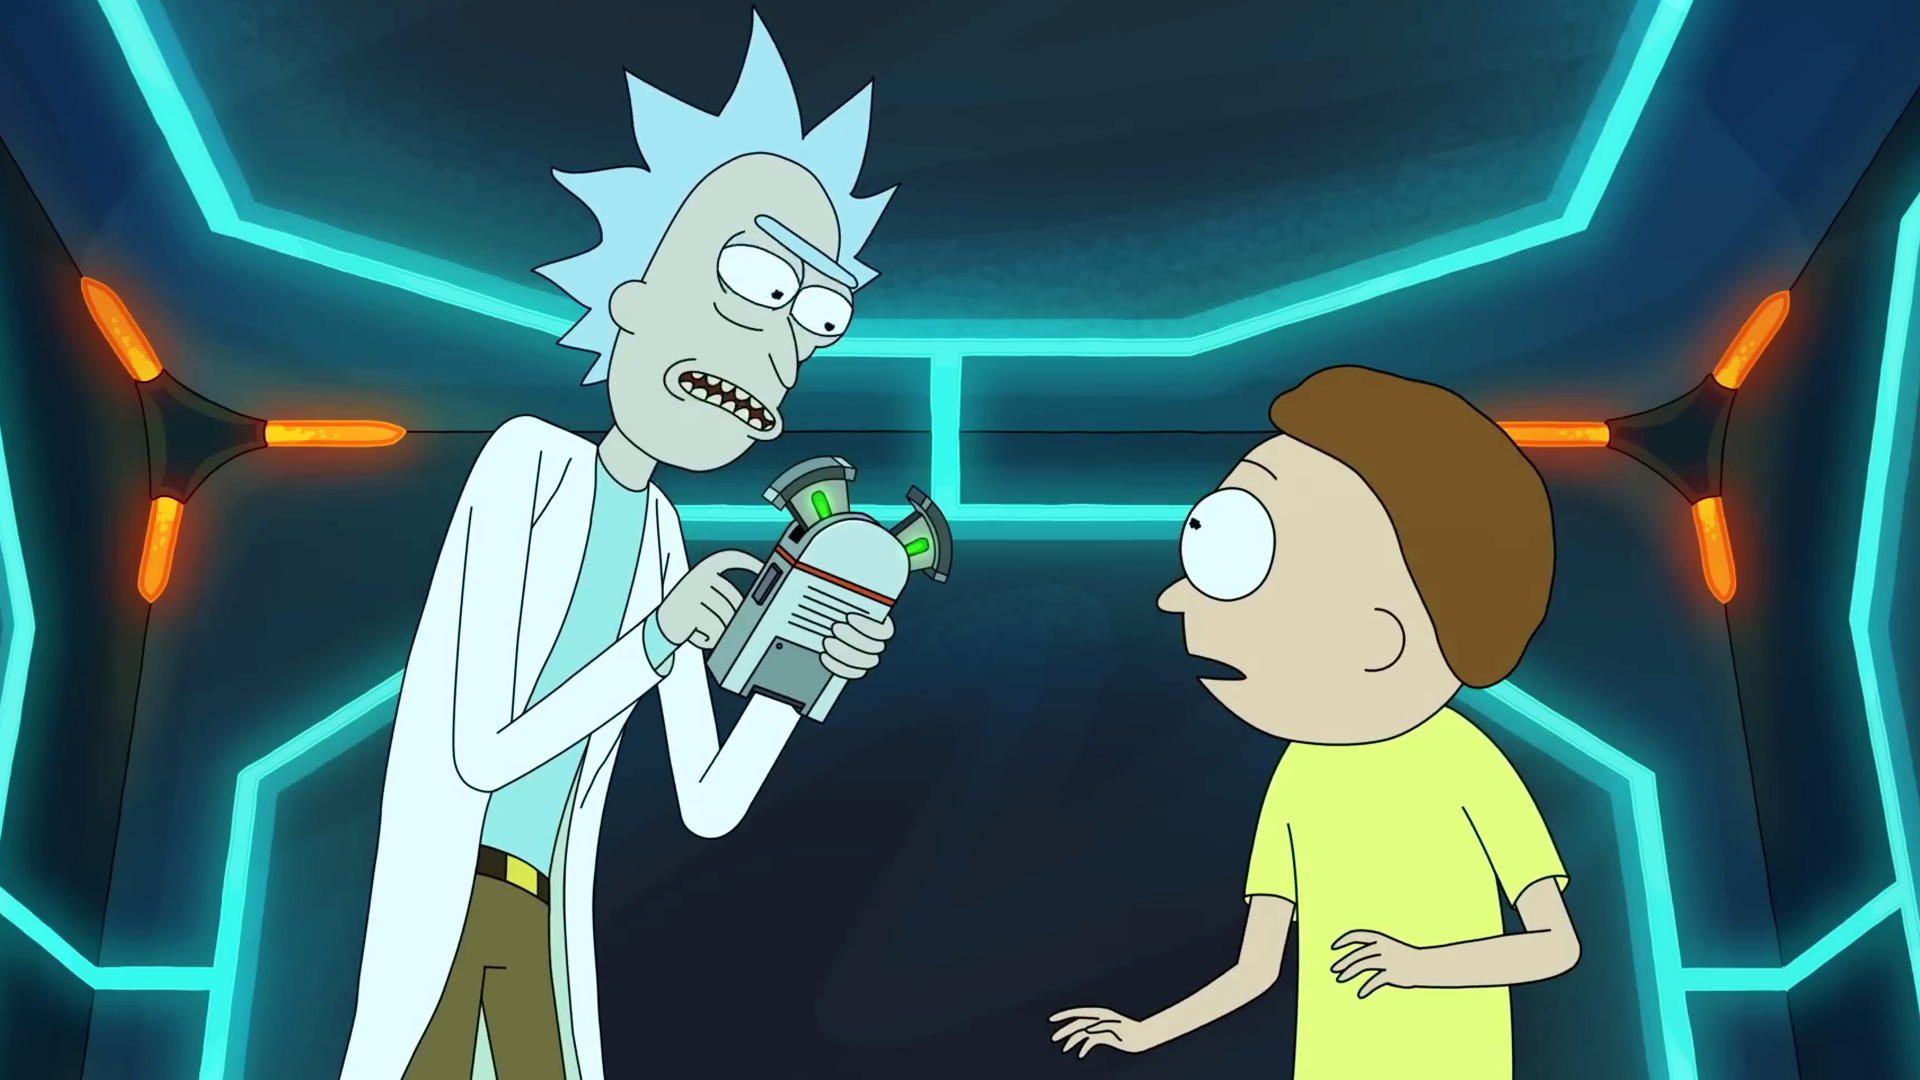 Can You Watch Rick and Morty Free Online via Streaming?